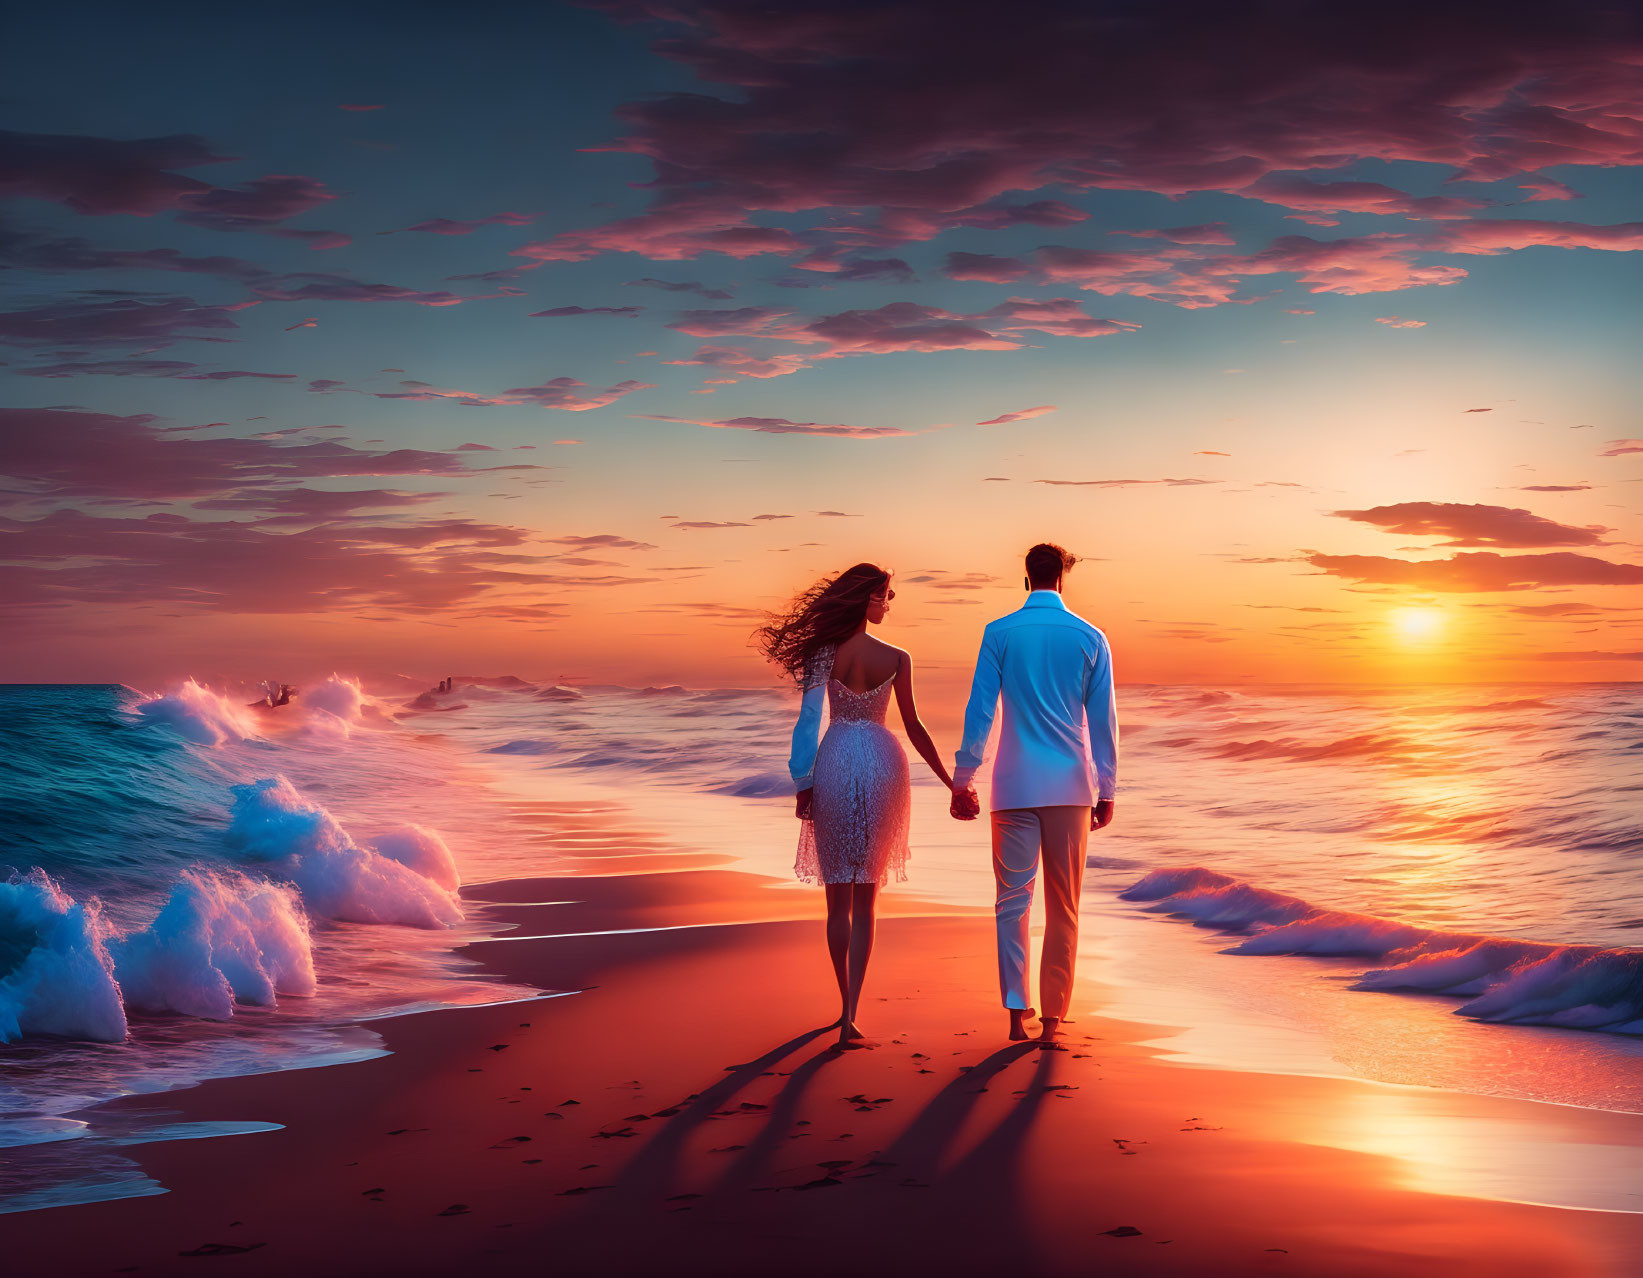 Couple Holding Hands on Beach at Sunset with Colorful Sky